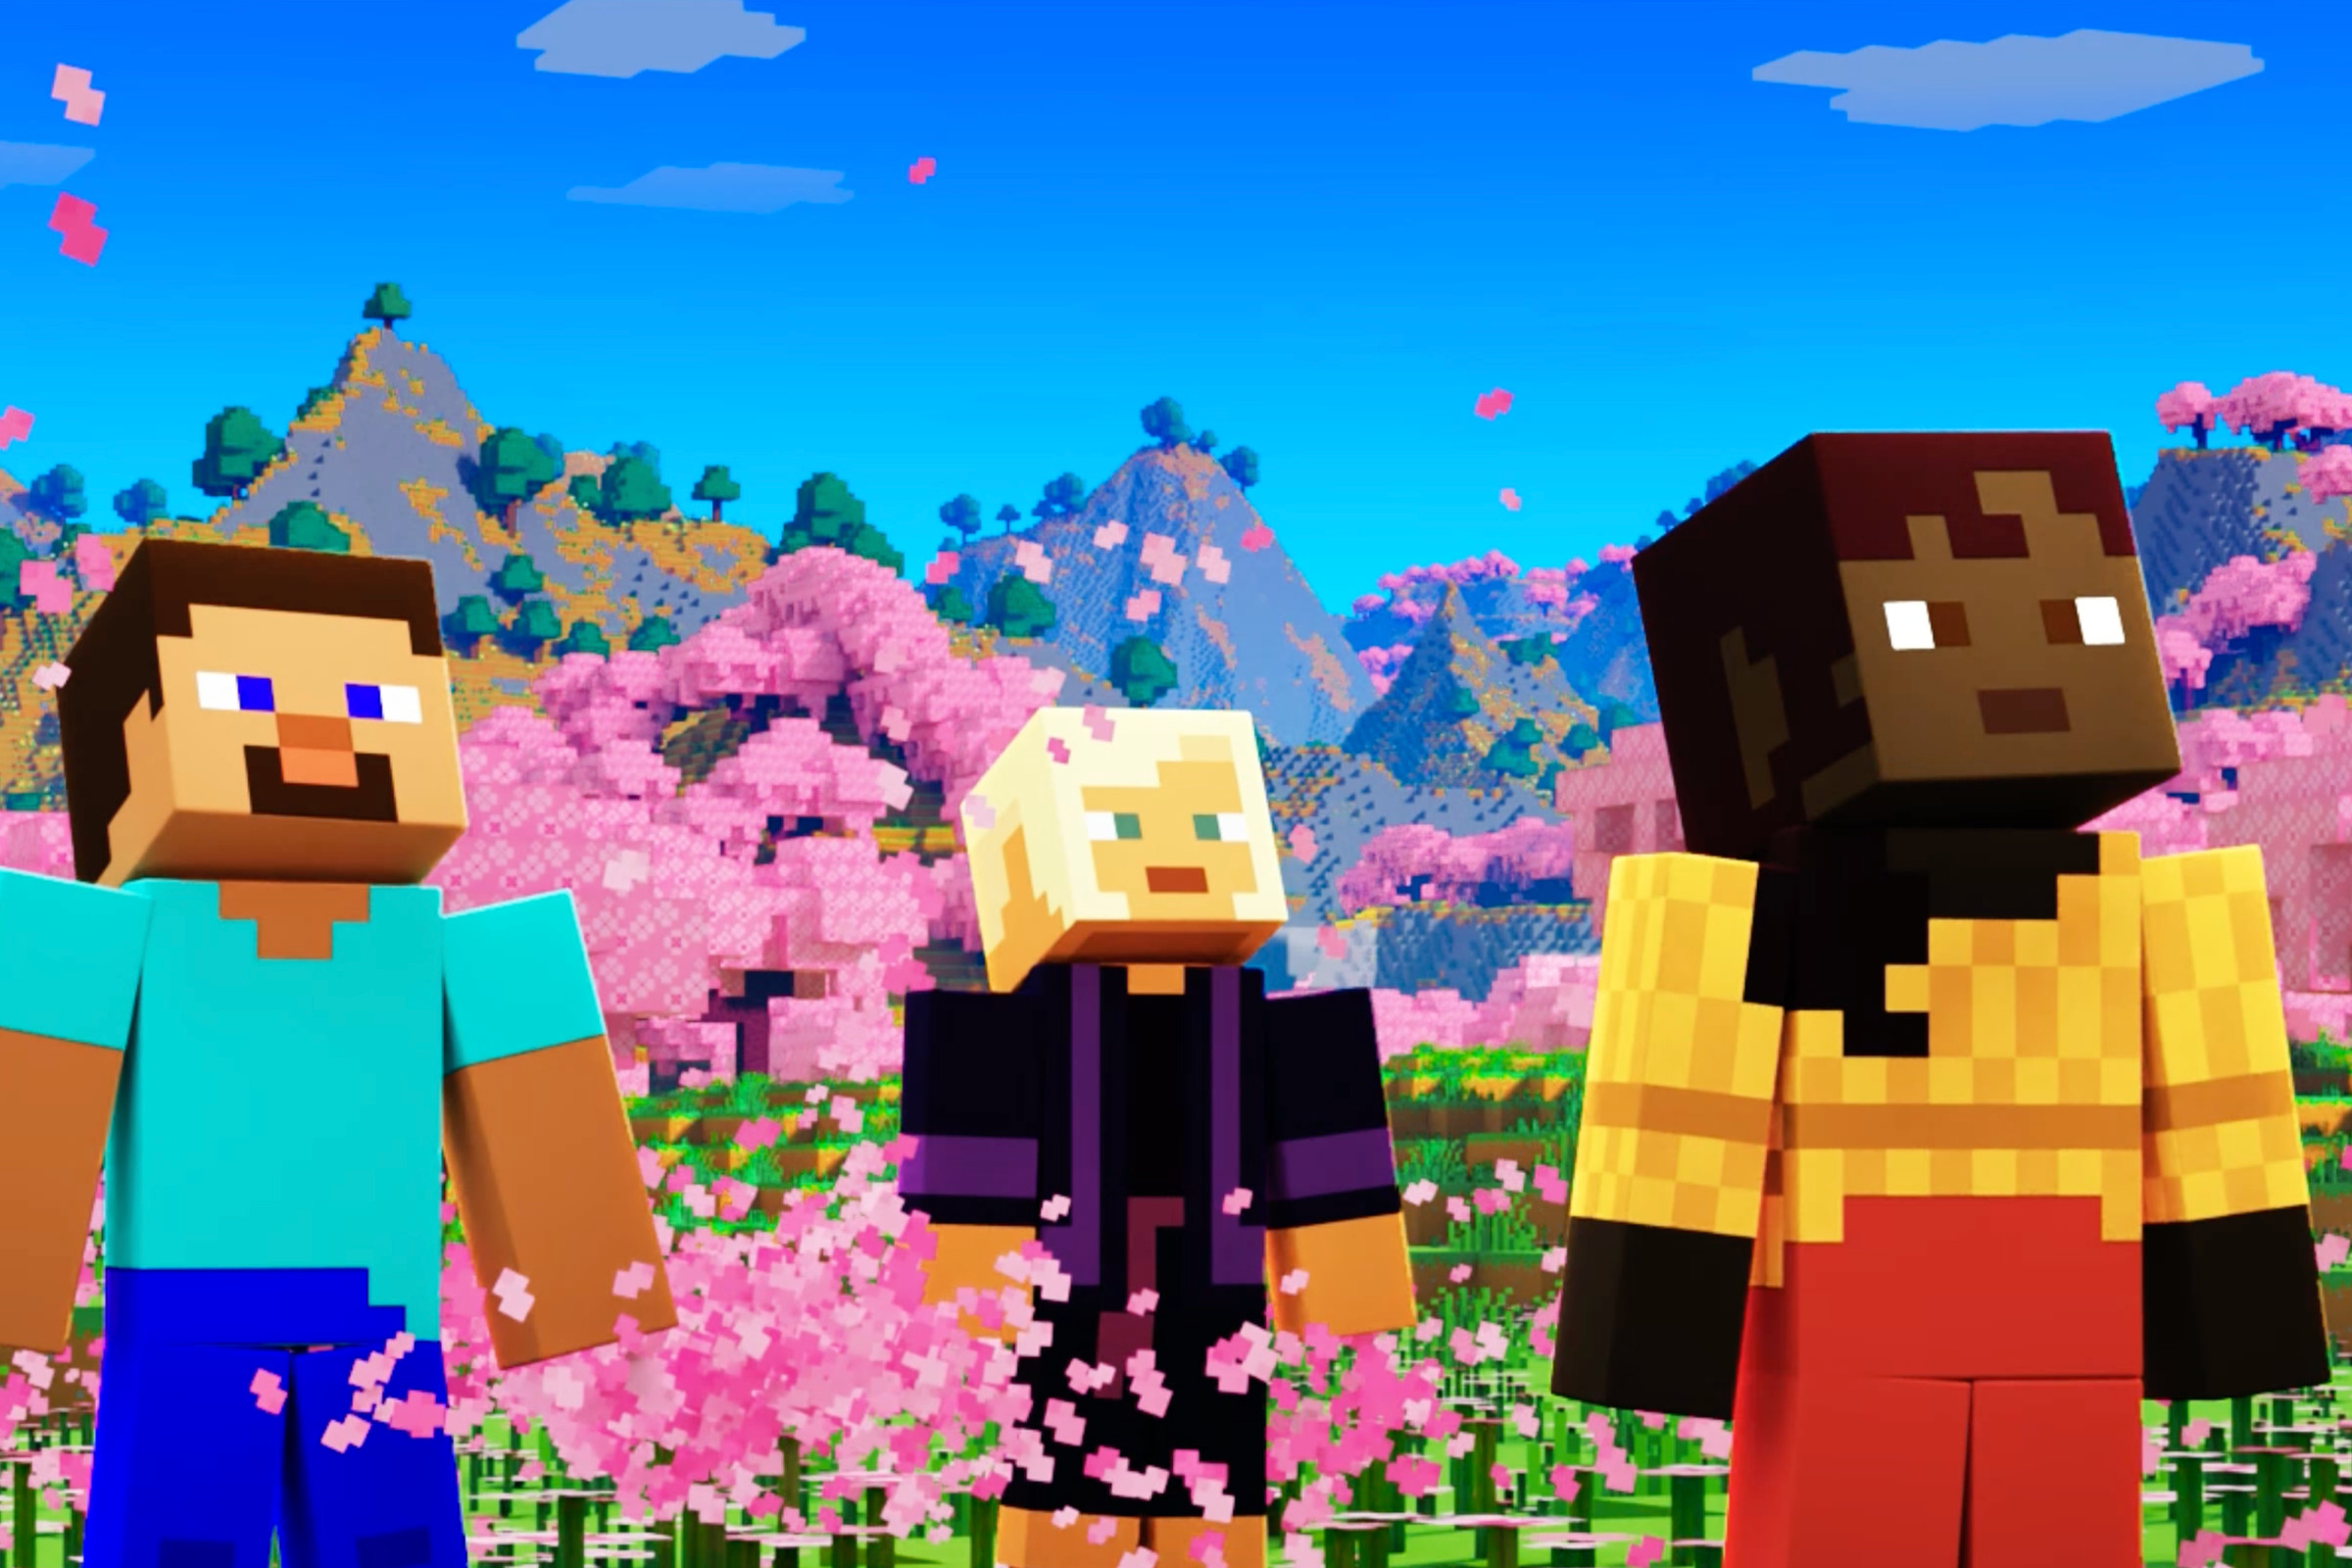 Image from Minecraft Live 2023 featuring three Minecraft characters standing in a field of flowers looking up at the sky.